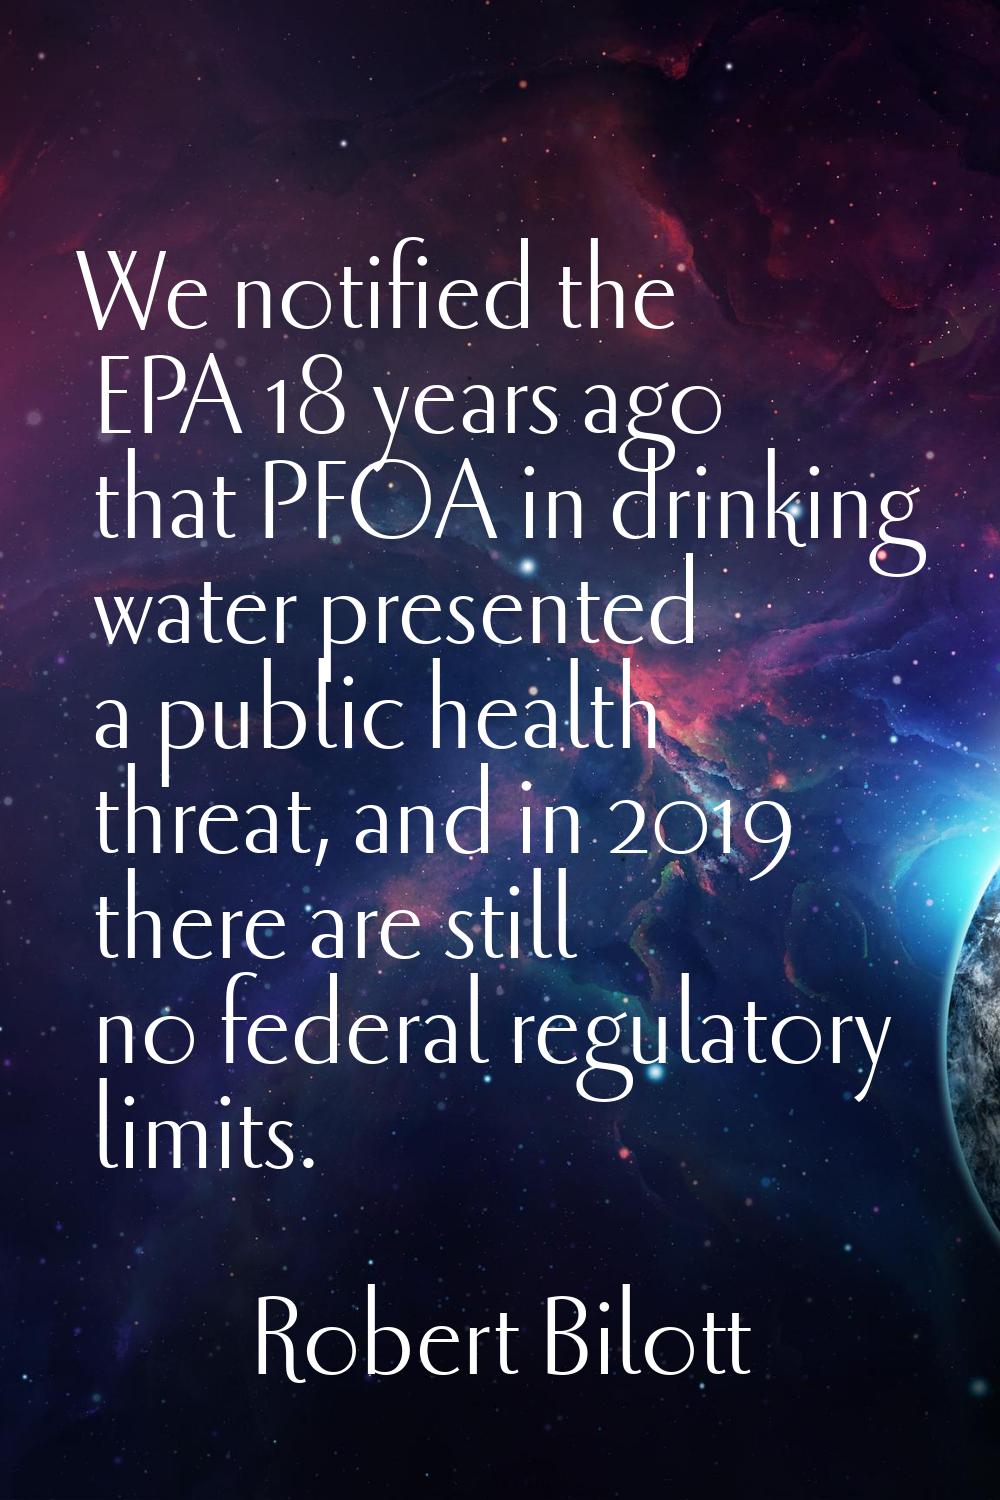 We notified the EPA 18 years ago that PFOA in drinking water presented a public health threat, and 